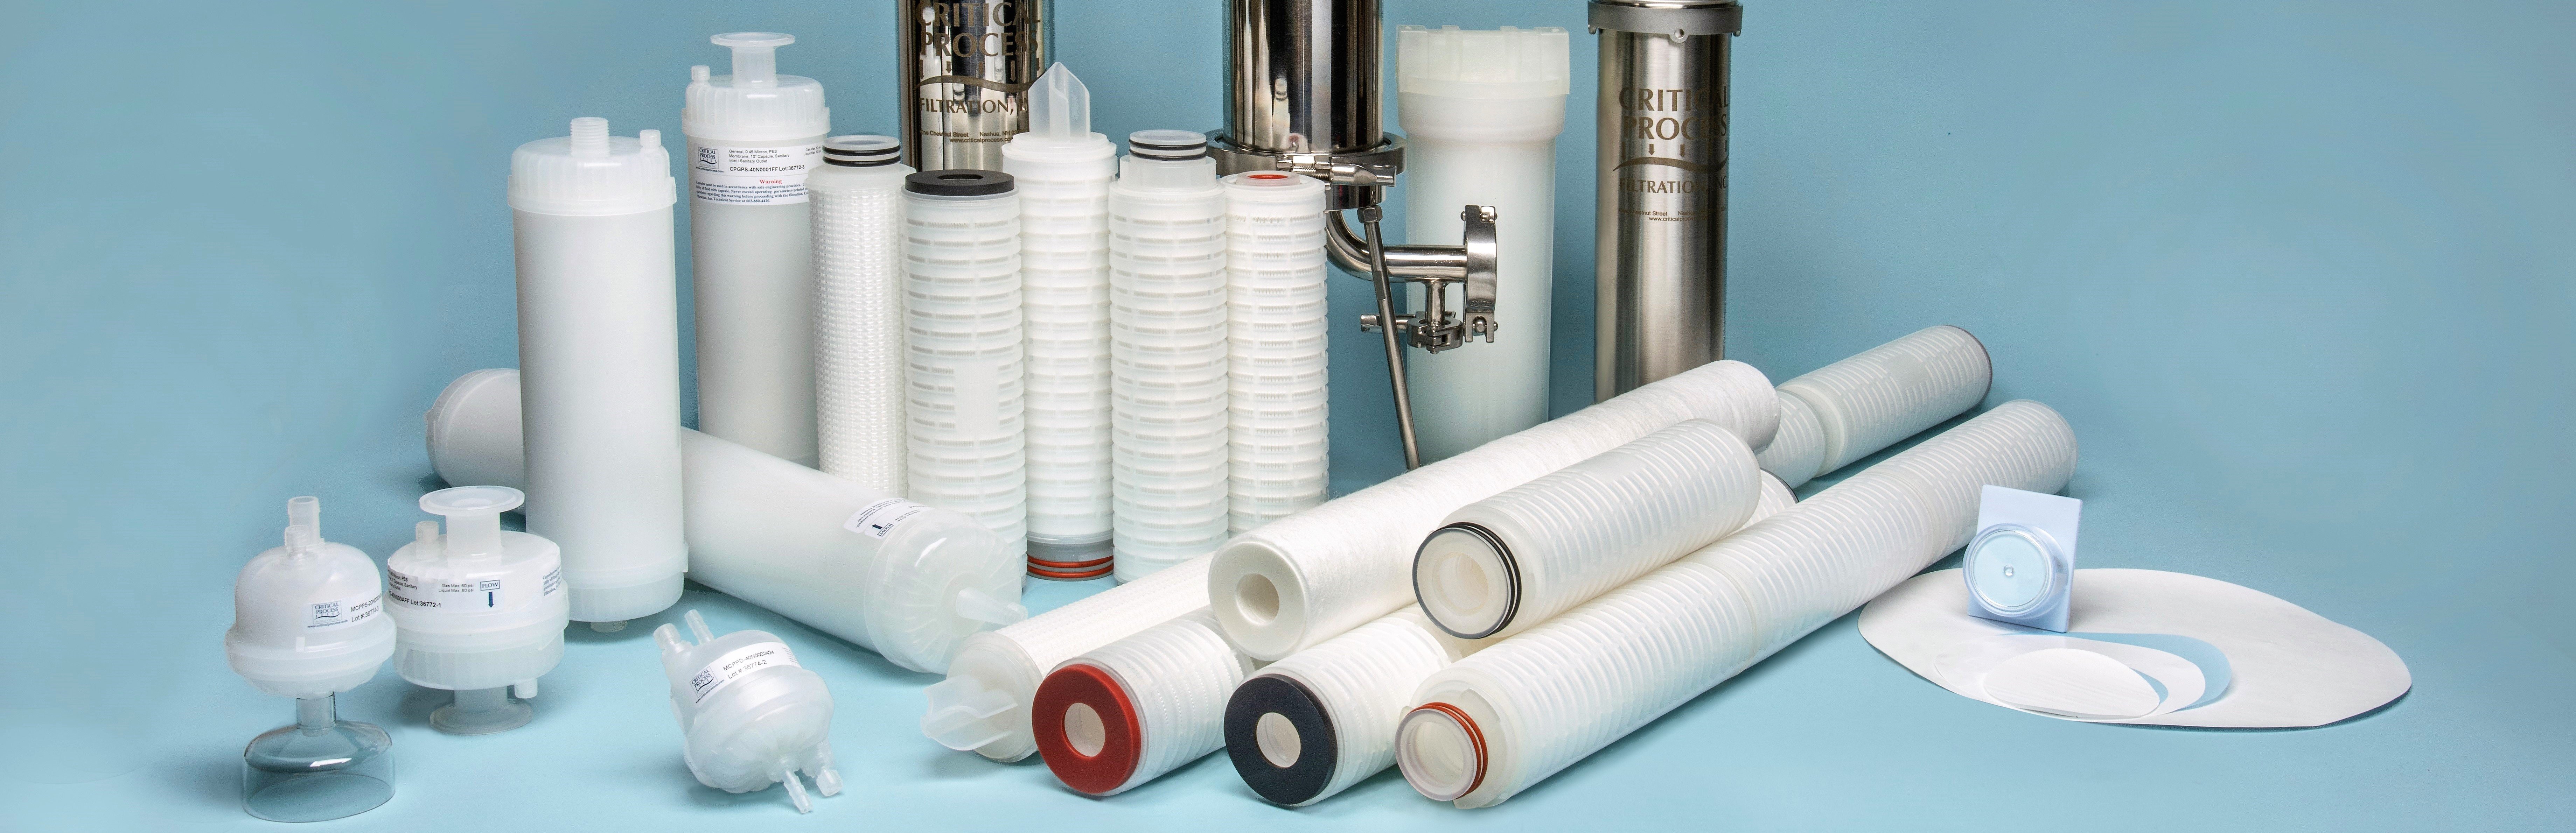 Choosing the right filter when nominal filter ratings differ, yet yield the same results.